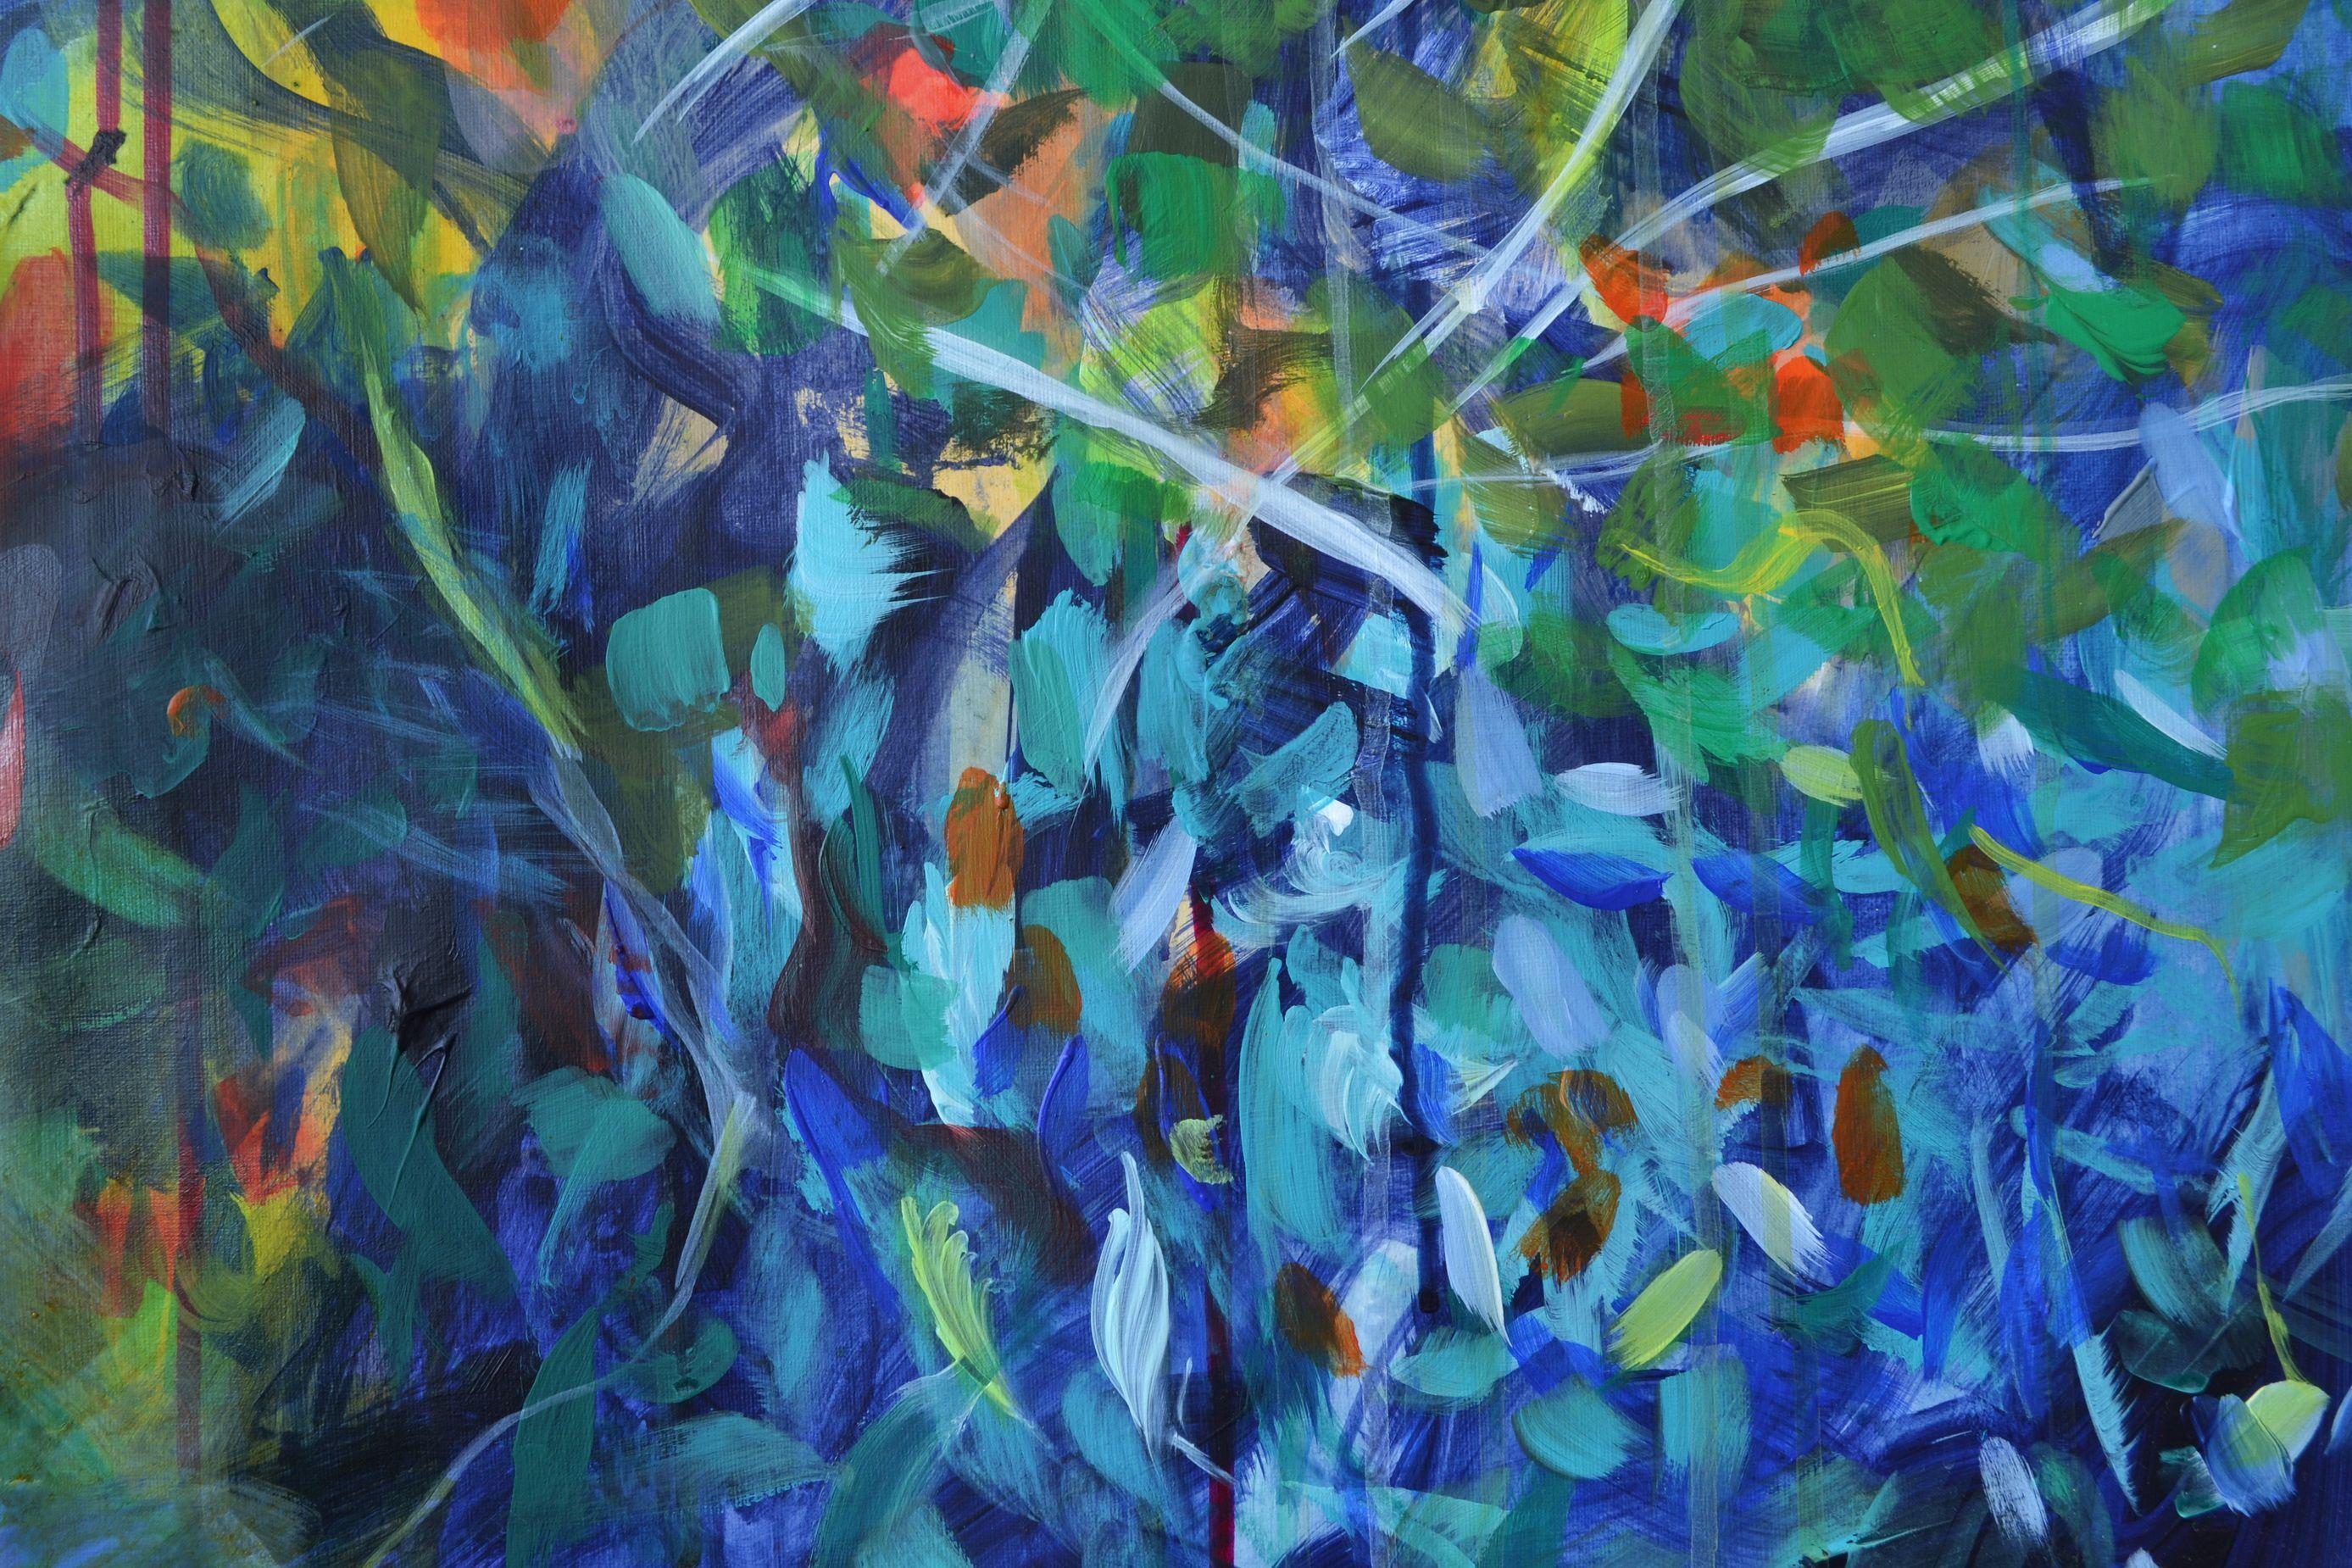 Ingress, Painting, Acrylic on Paper - Blue Abstract Painting by Karin Goeppert